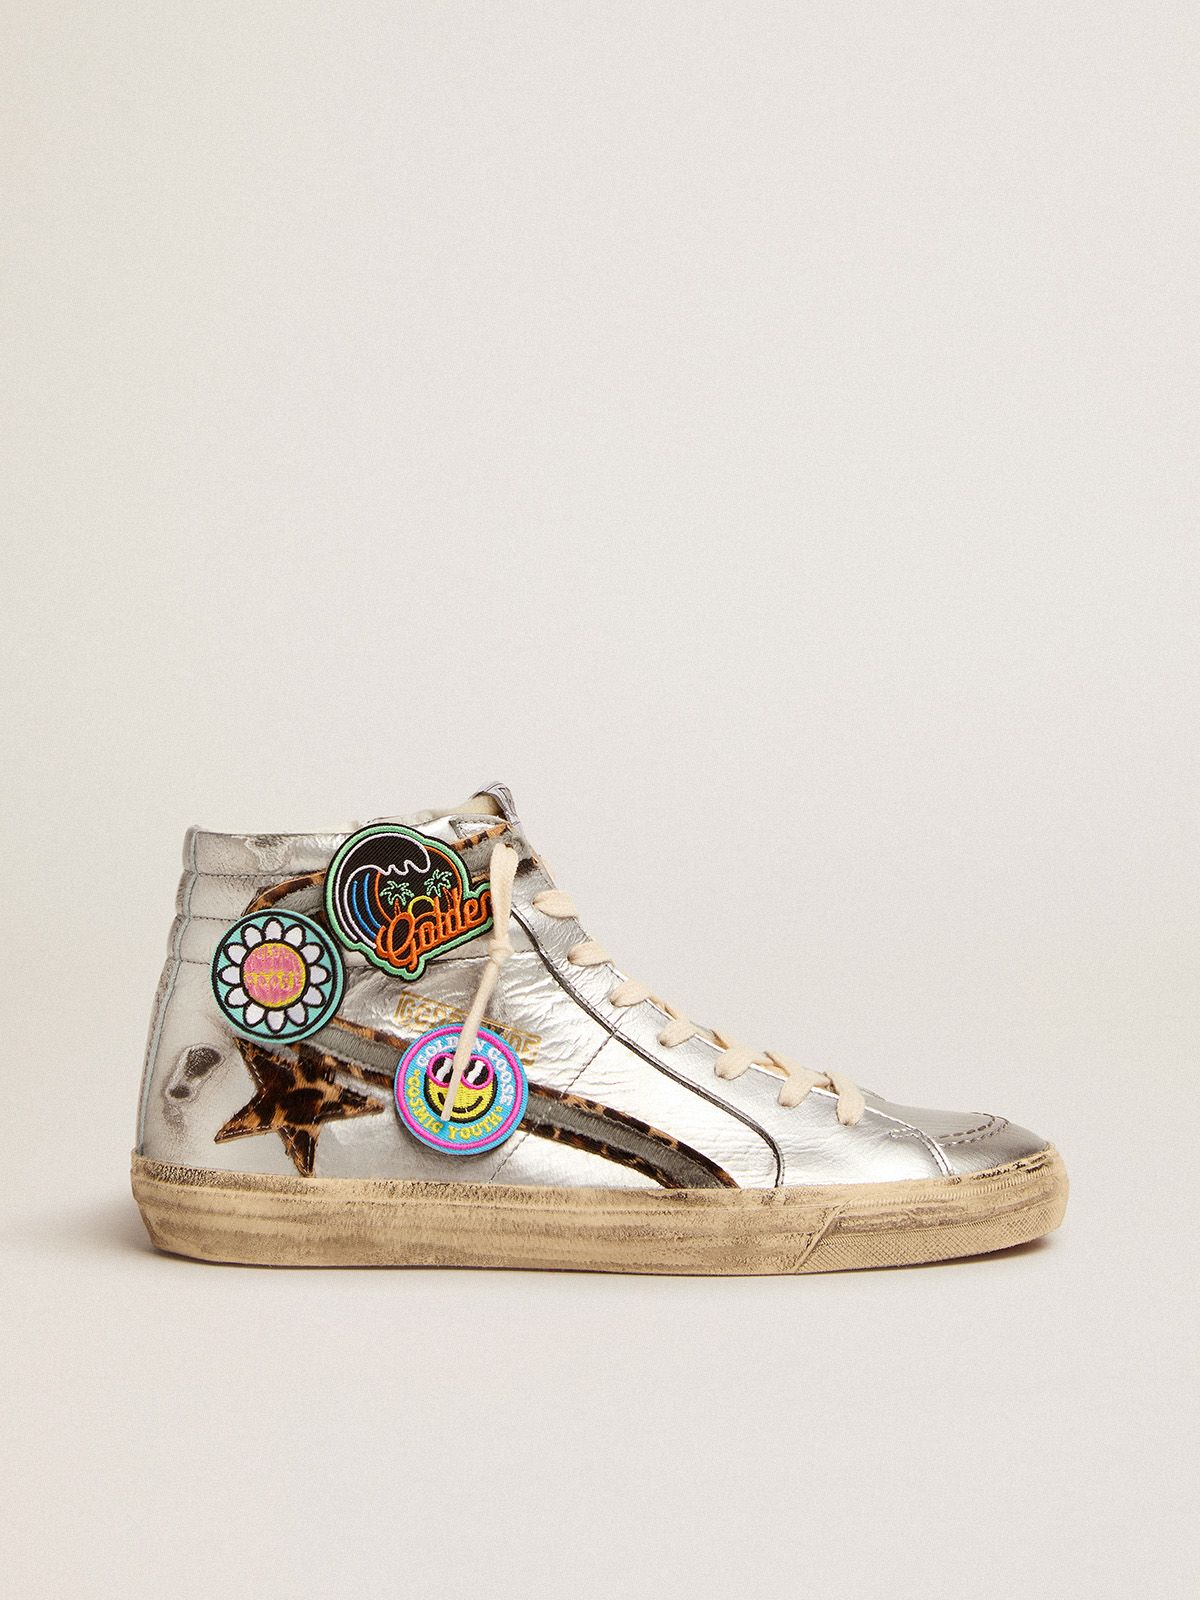 golden goose leopard-print Slide patches in multicolored and flash star skin laminated detachable with pony sneakers leather silver